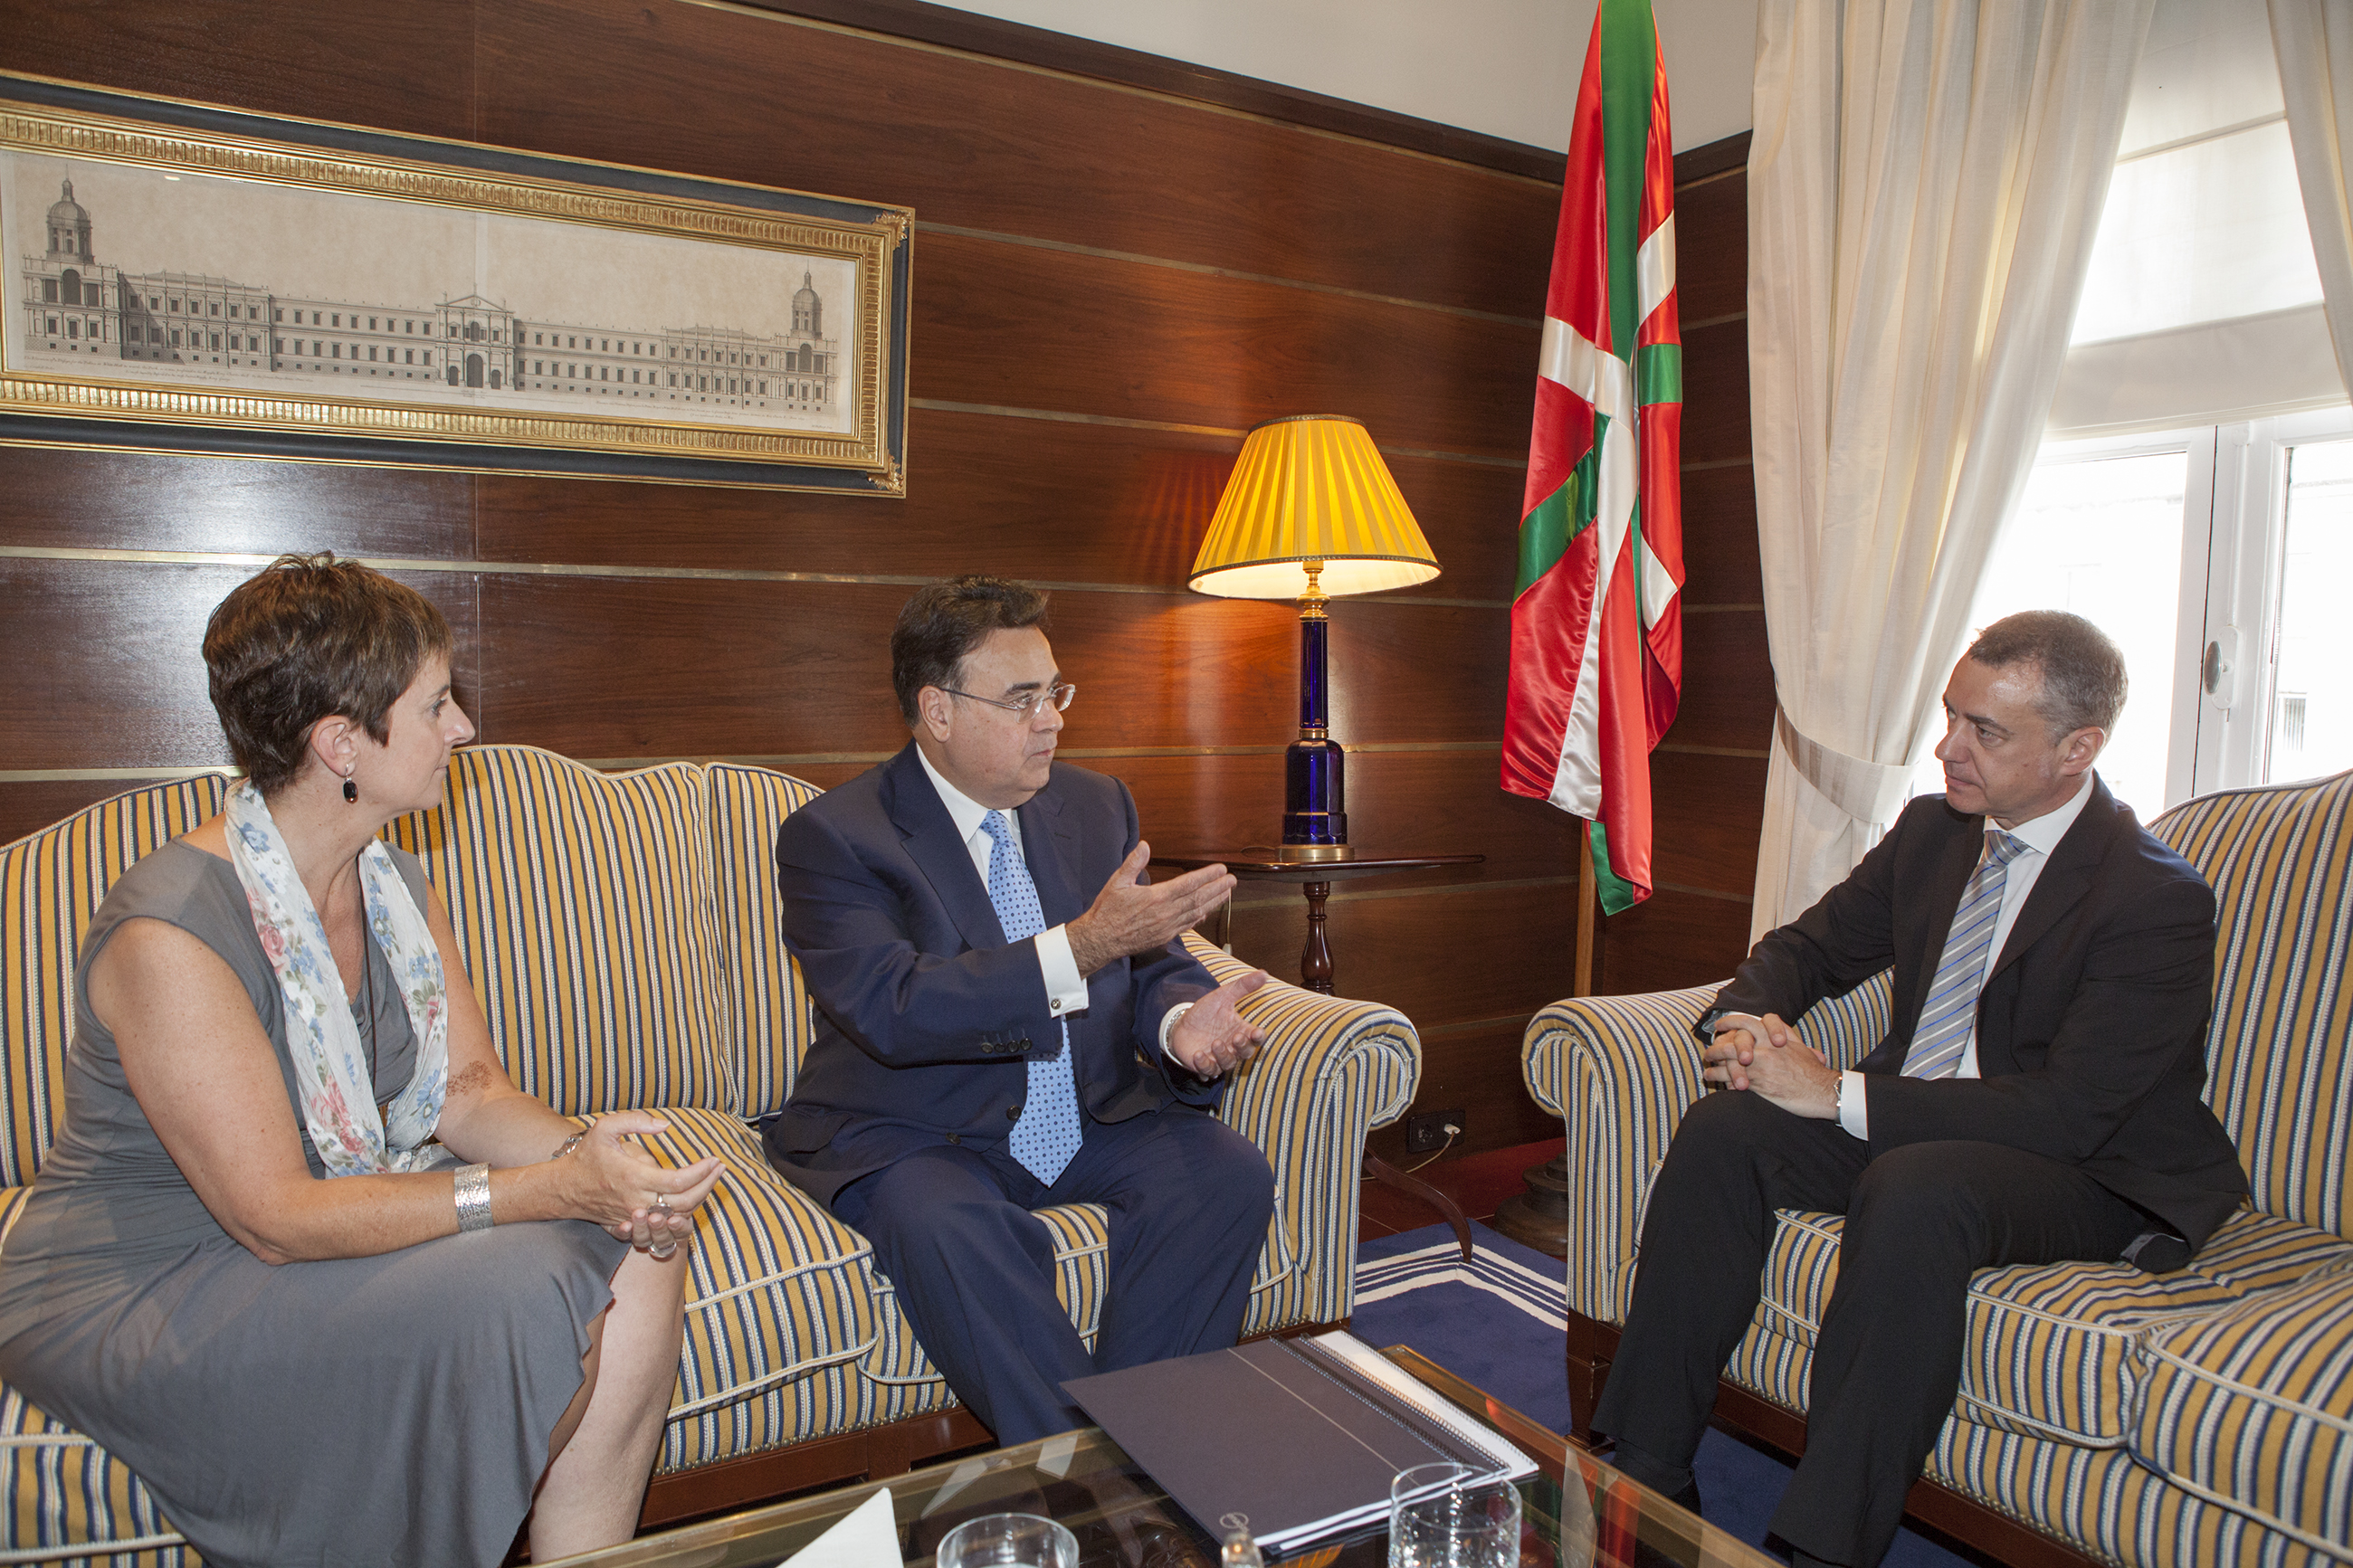 Antonio Llardén in an institutional meeting with the president of the Basque Country